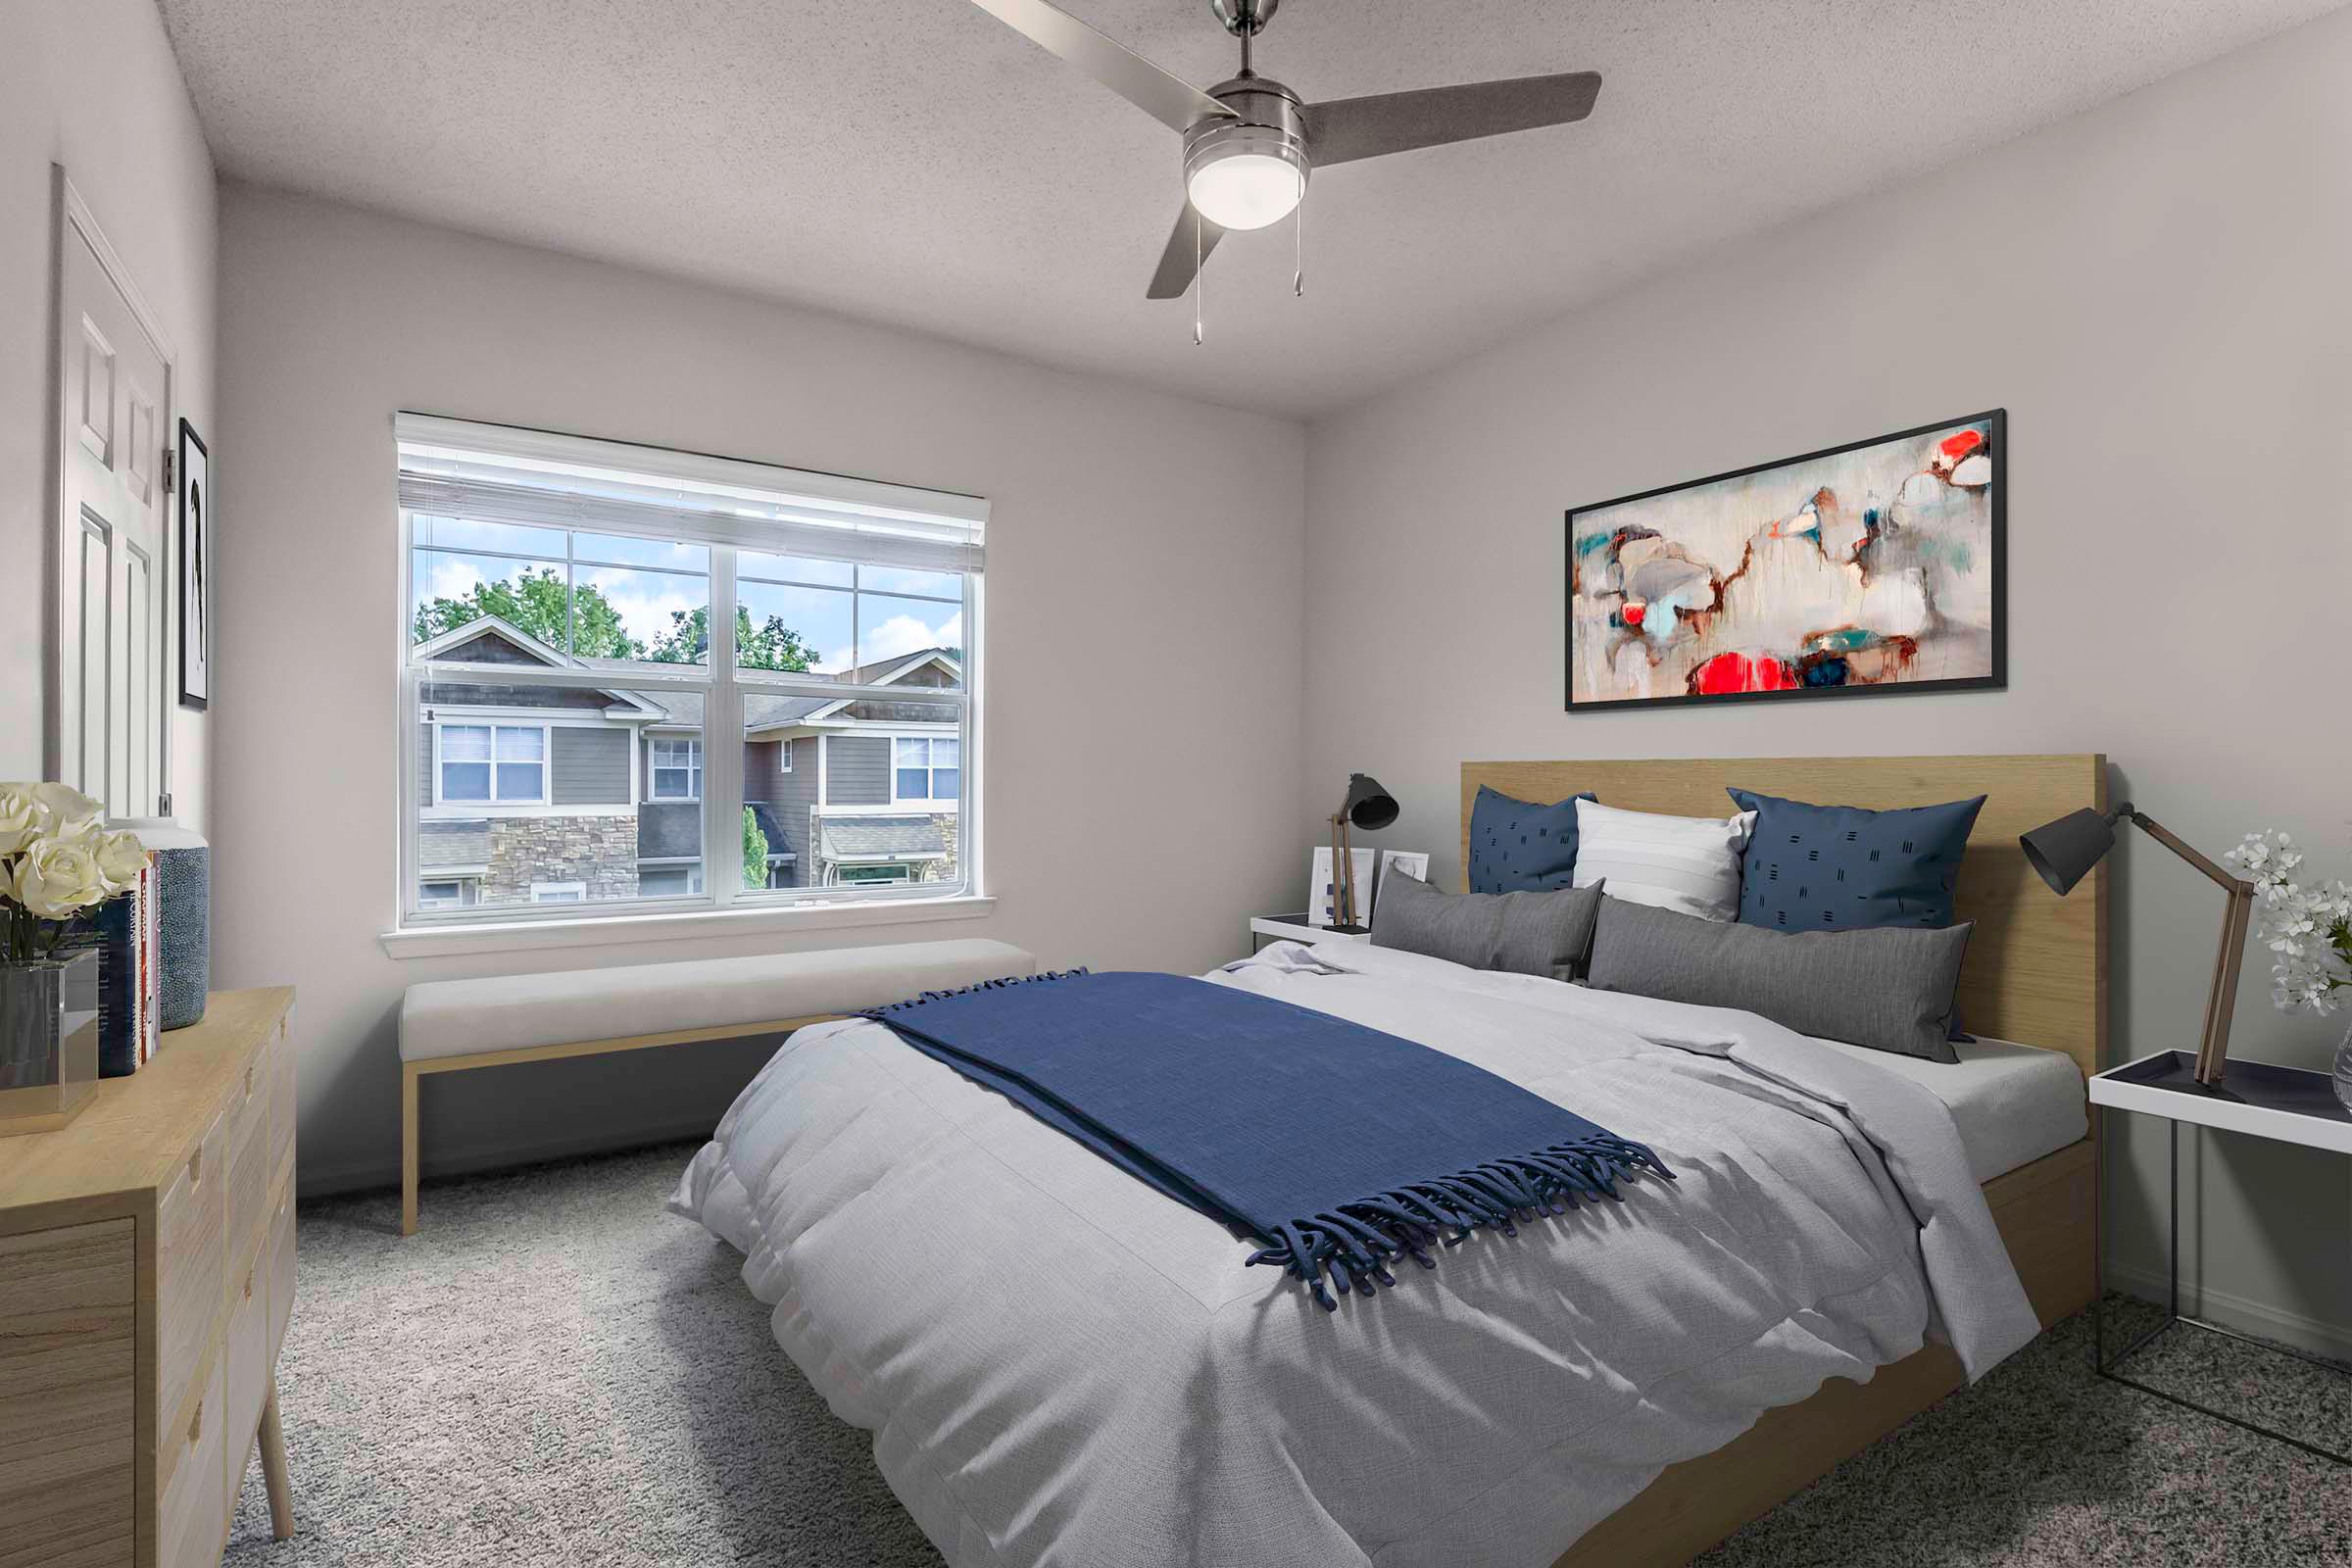 Townhome bedroom with ceiling fan and carpet flooring Camden Deerfield Apartments Alpharetta (770)872-6592